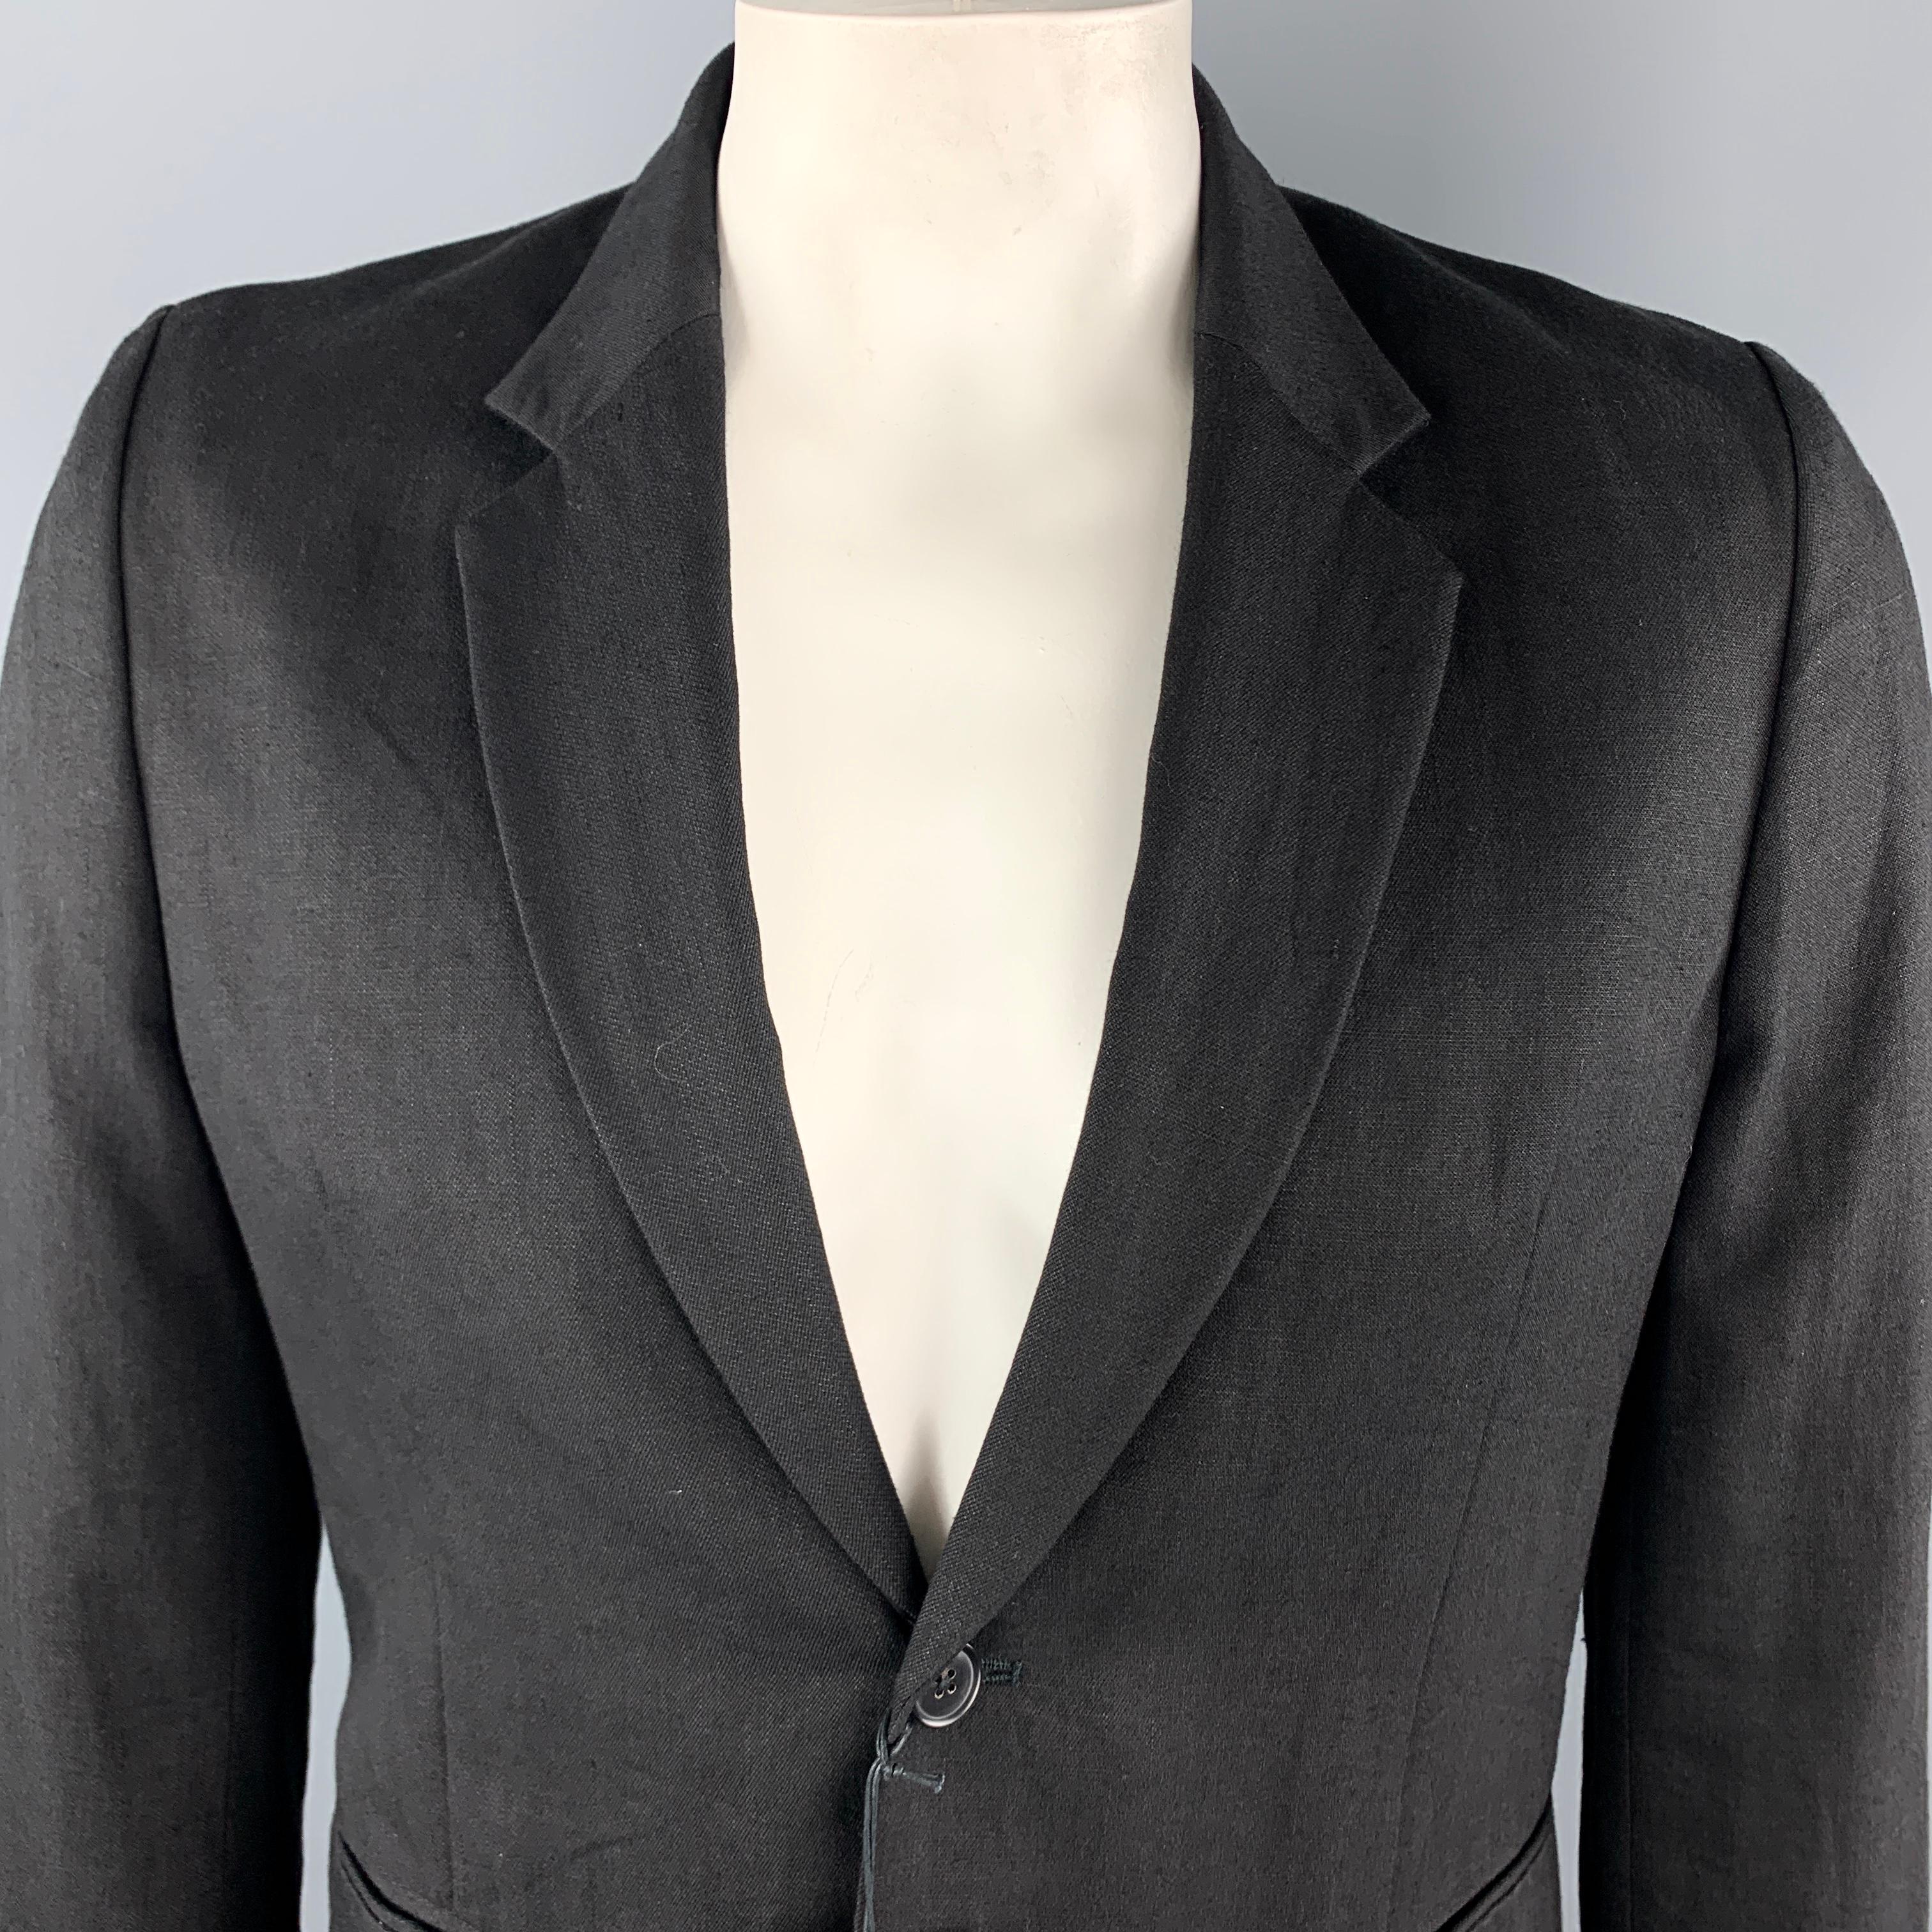 PAUL SMITH Sport Coat comes in a solid black linen / wool material, with a notch lapel, slit pockets, a single button at closure, single breasted, unbuttoned cuffs, unlined. Made in Italy.

New with Tags.
Marked: No size

Measurements:

Shoulder: 17